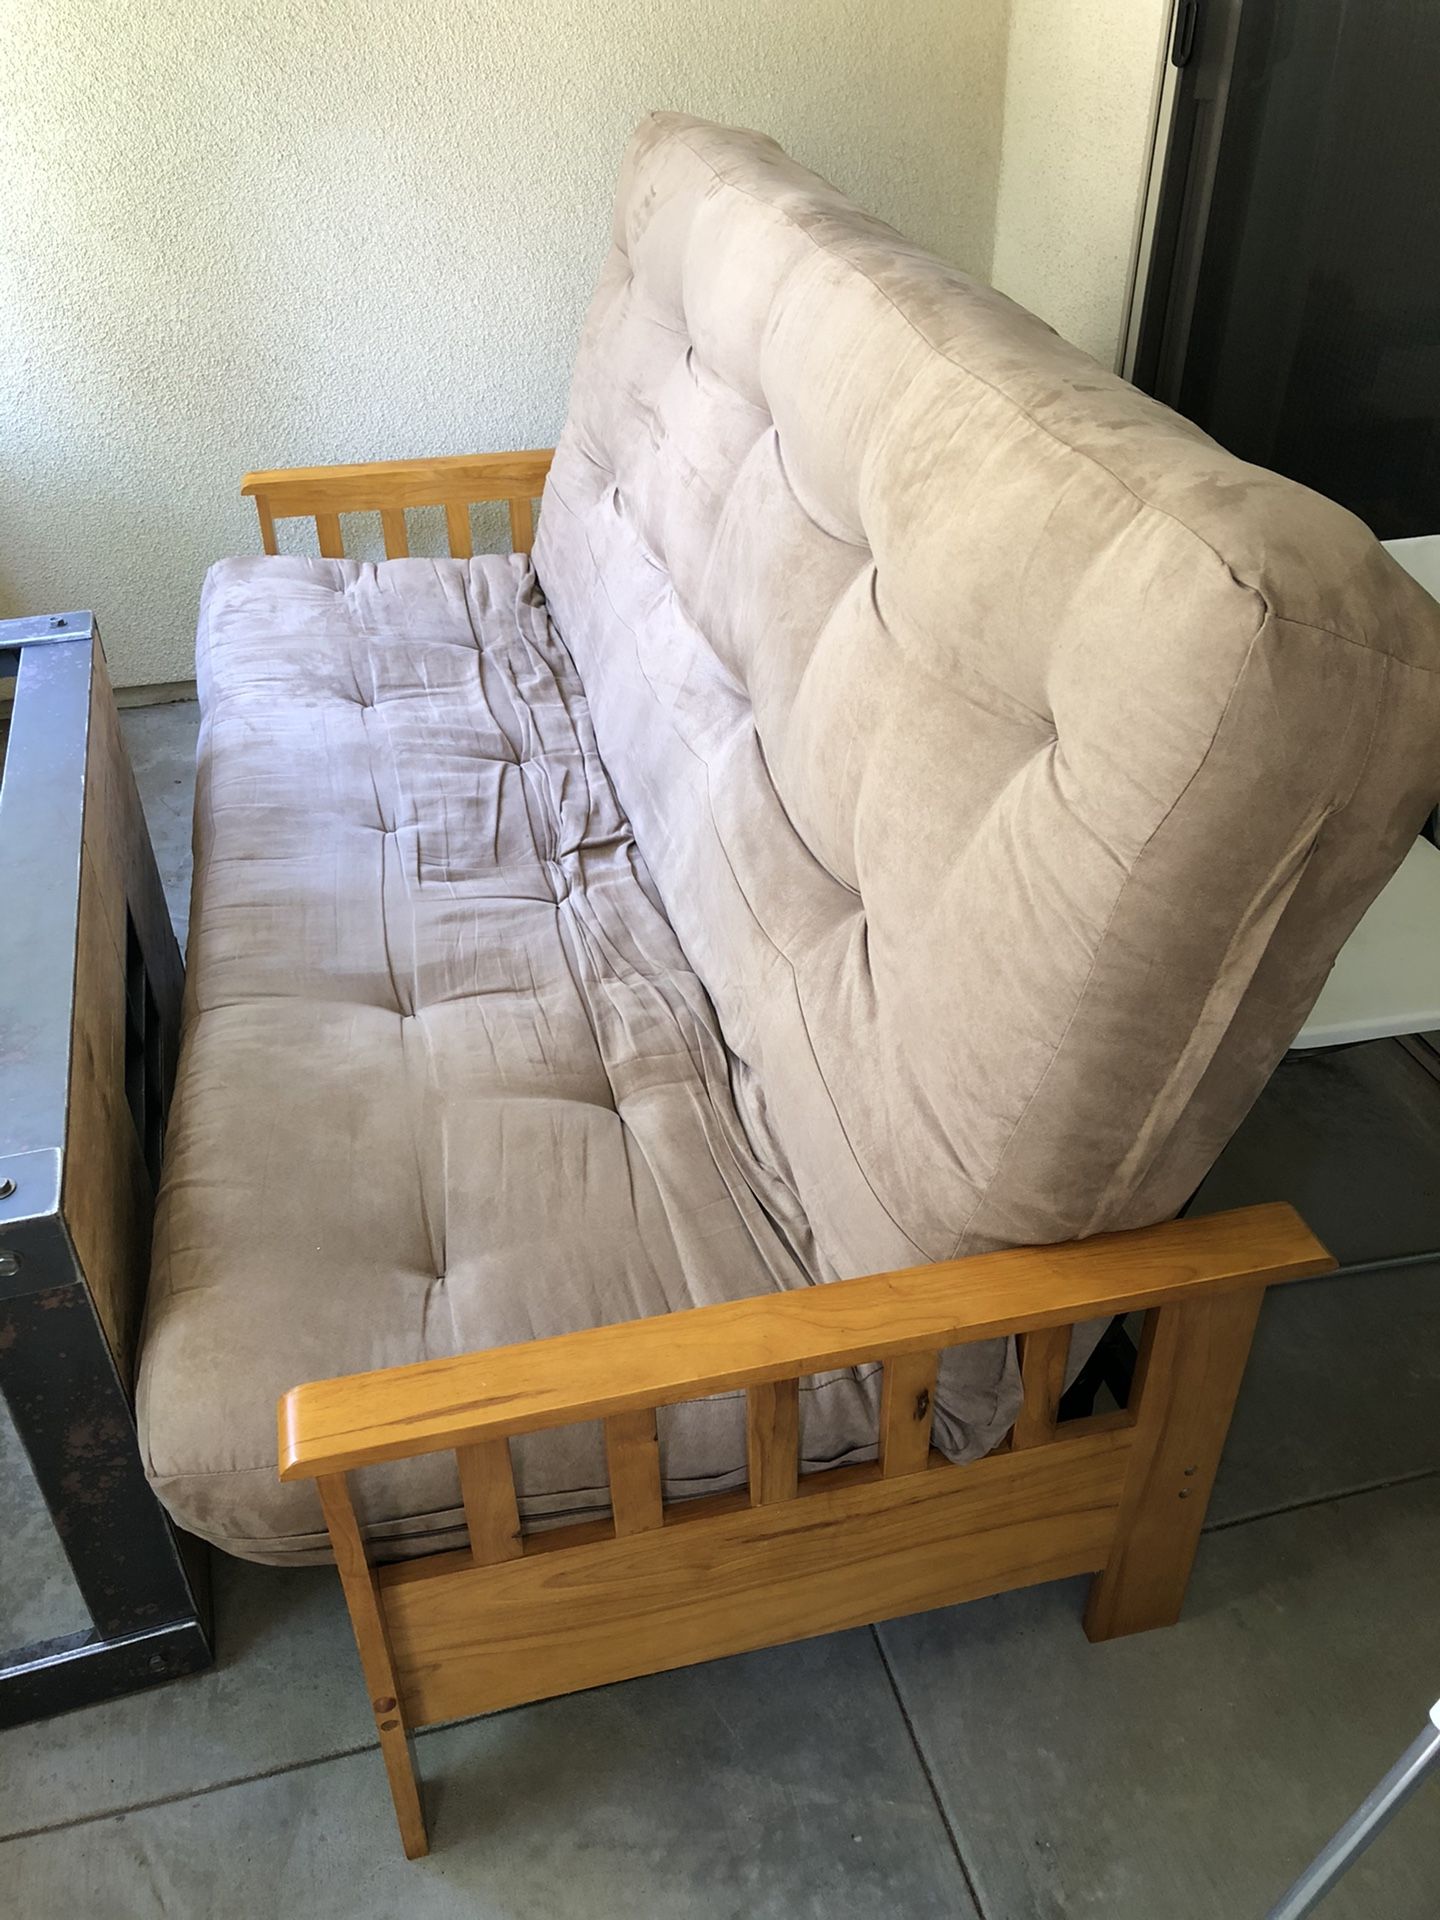 Queen size sofa bed for sale, coffee table free.